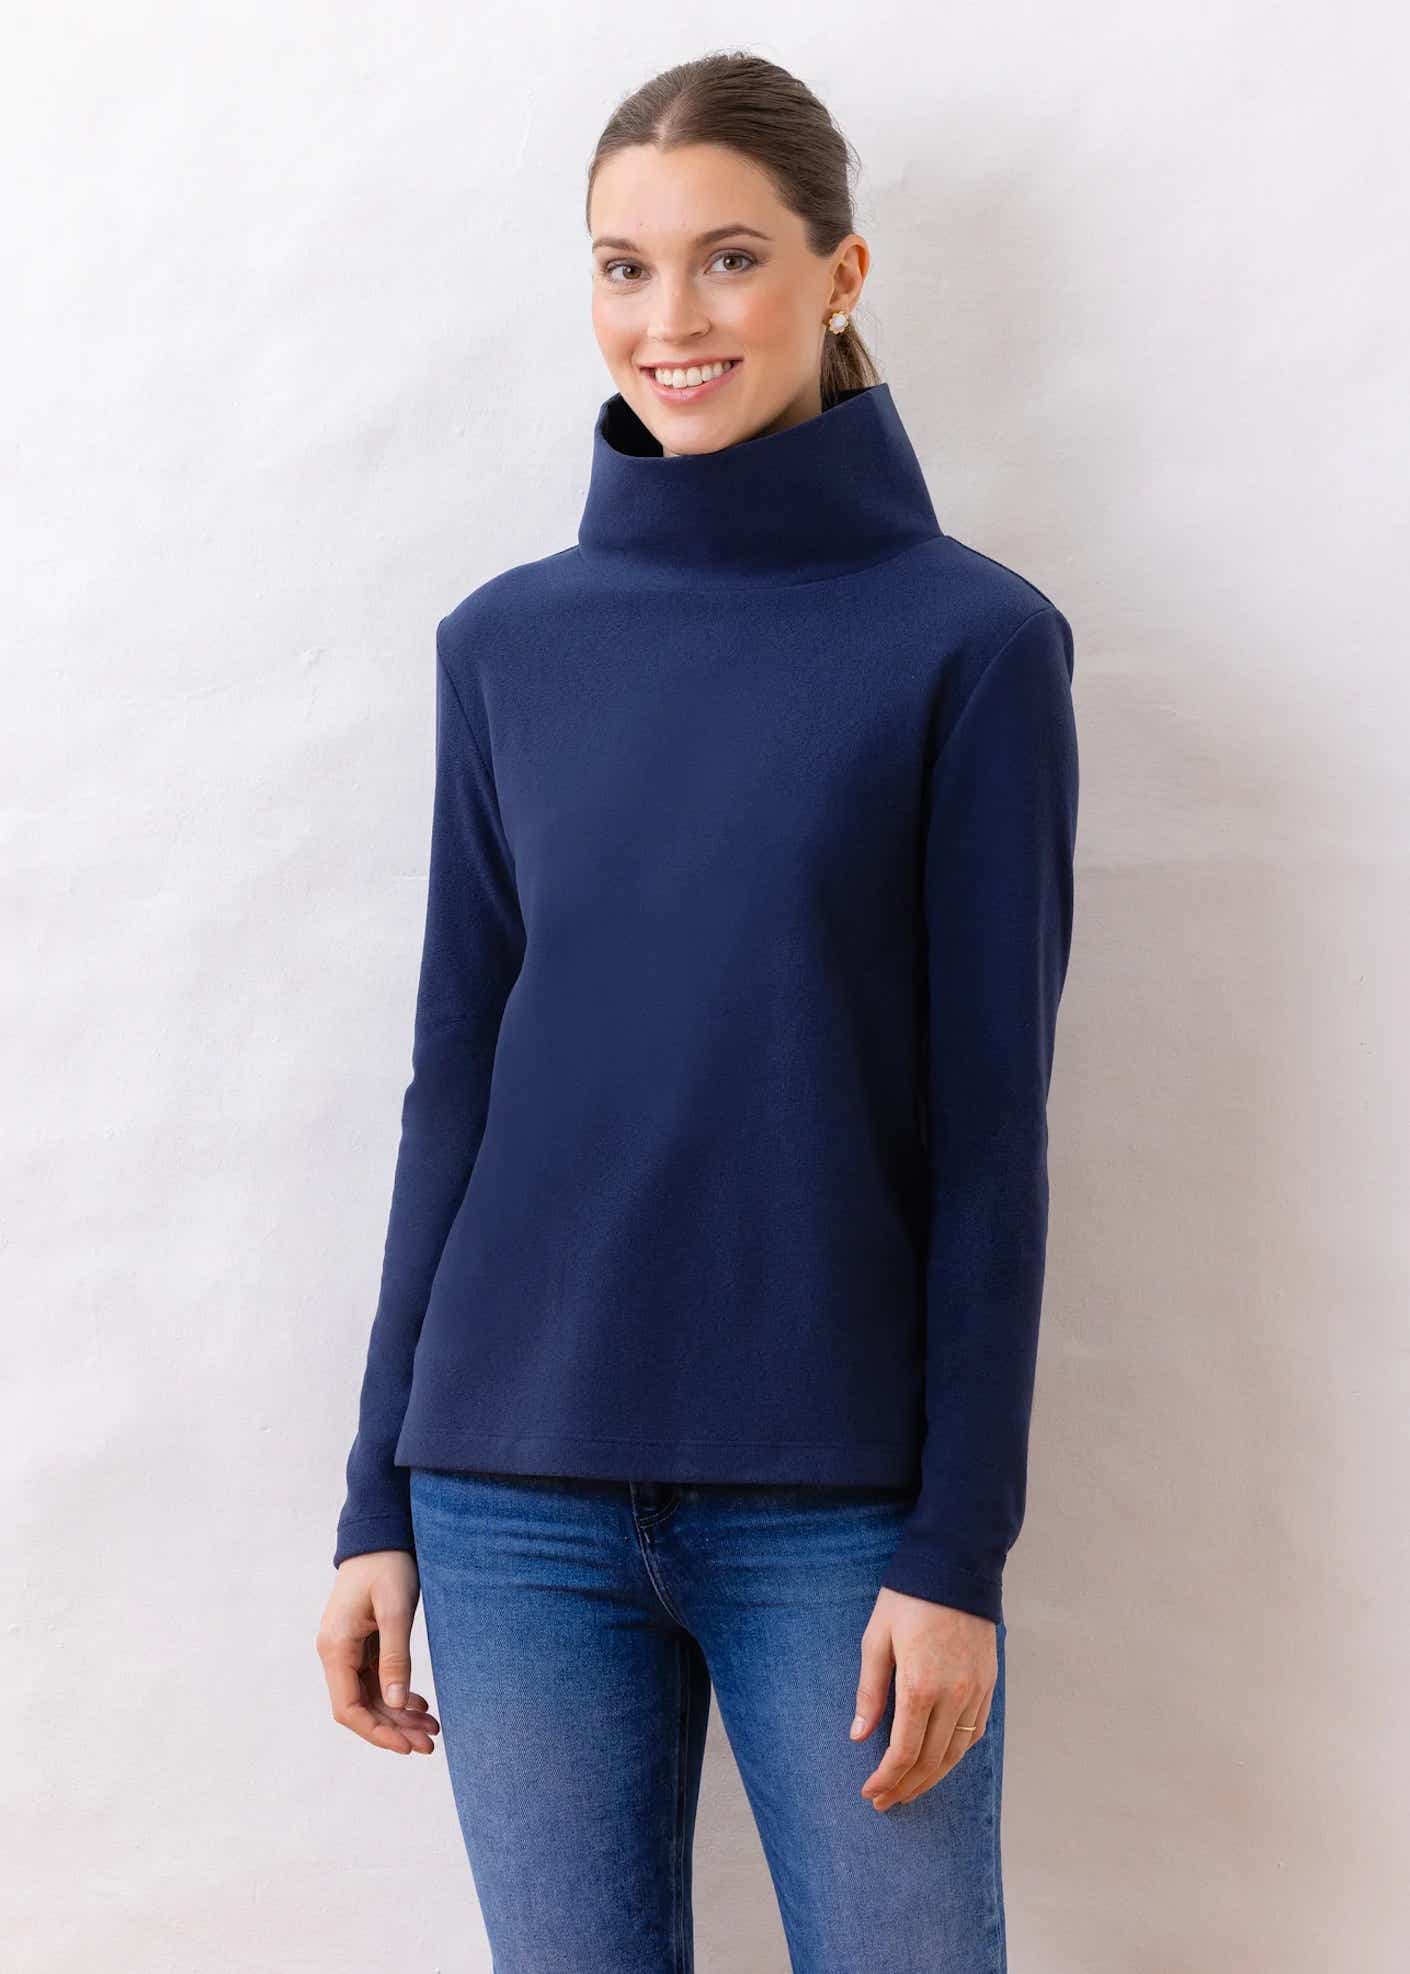 A woman stands posing in a turtleneck.